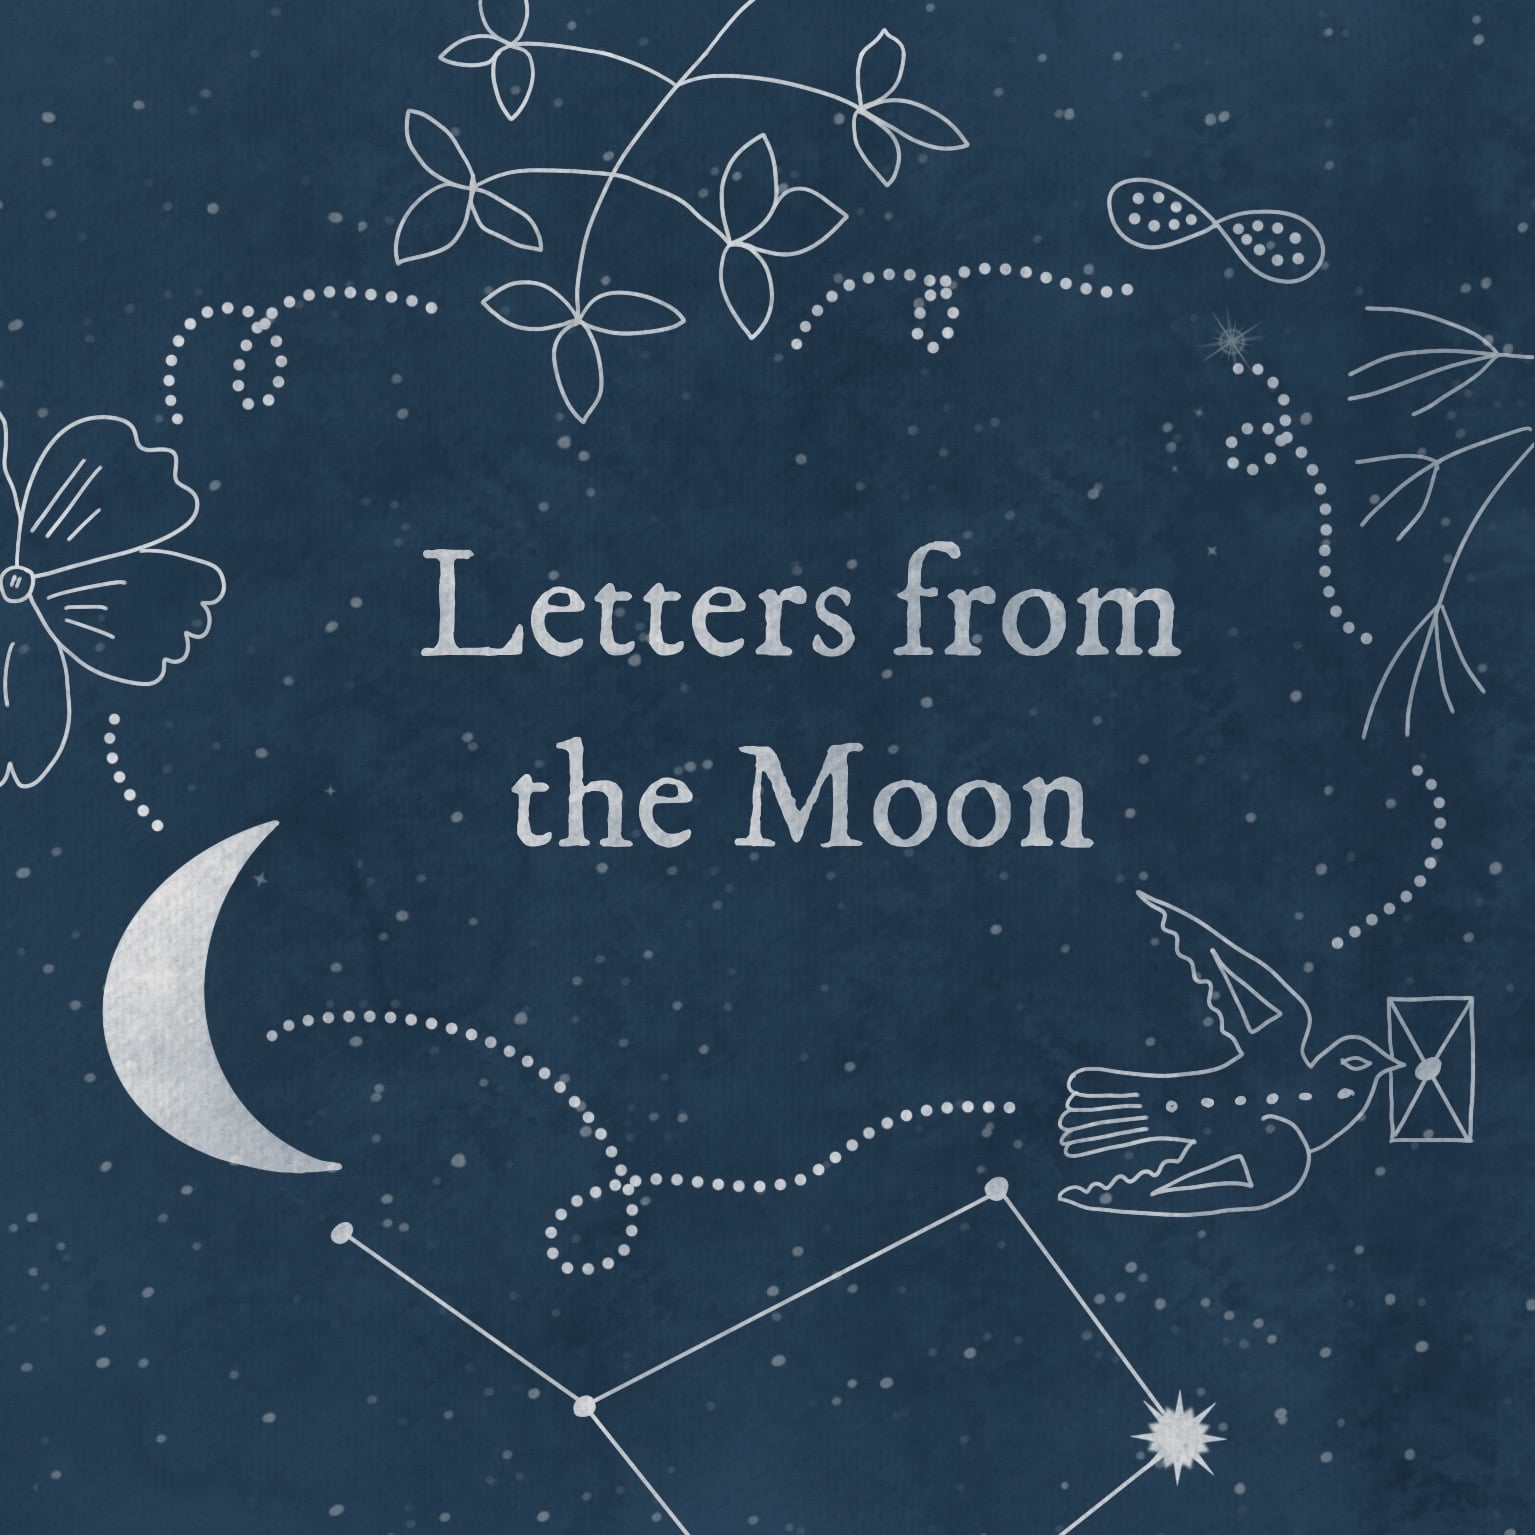 Letters from the moon